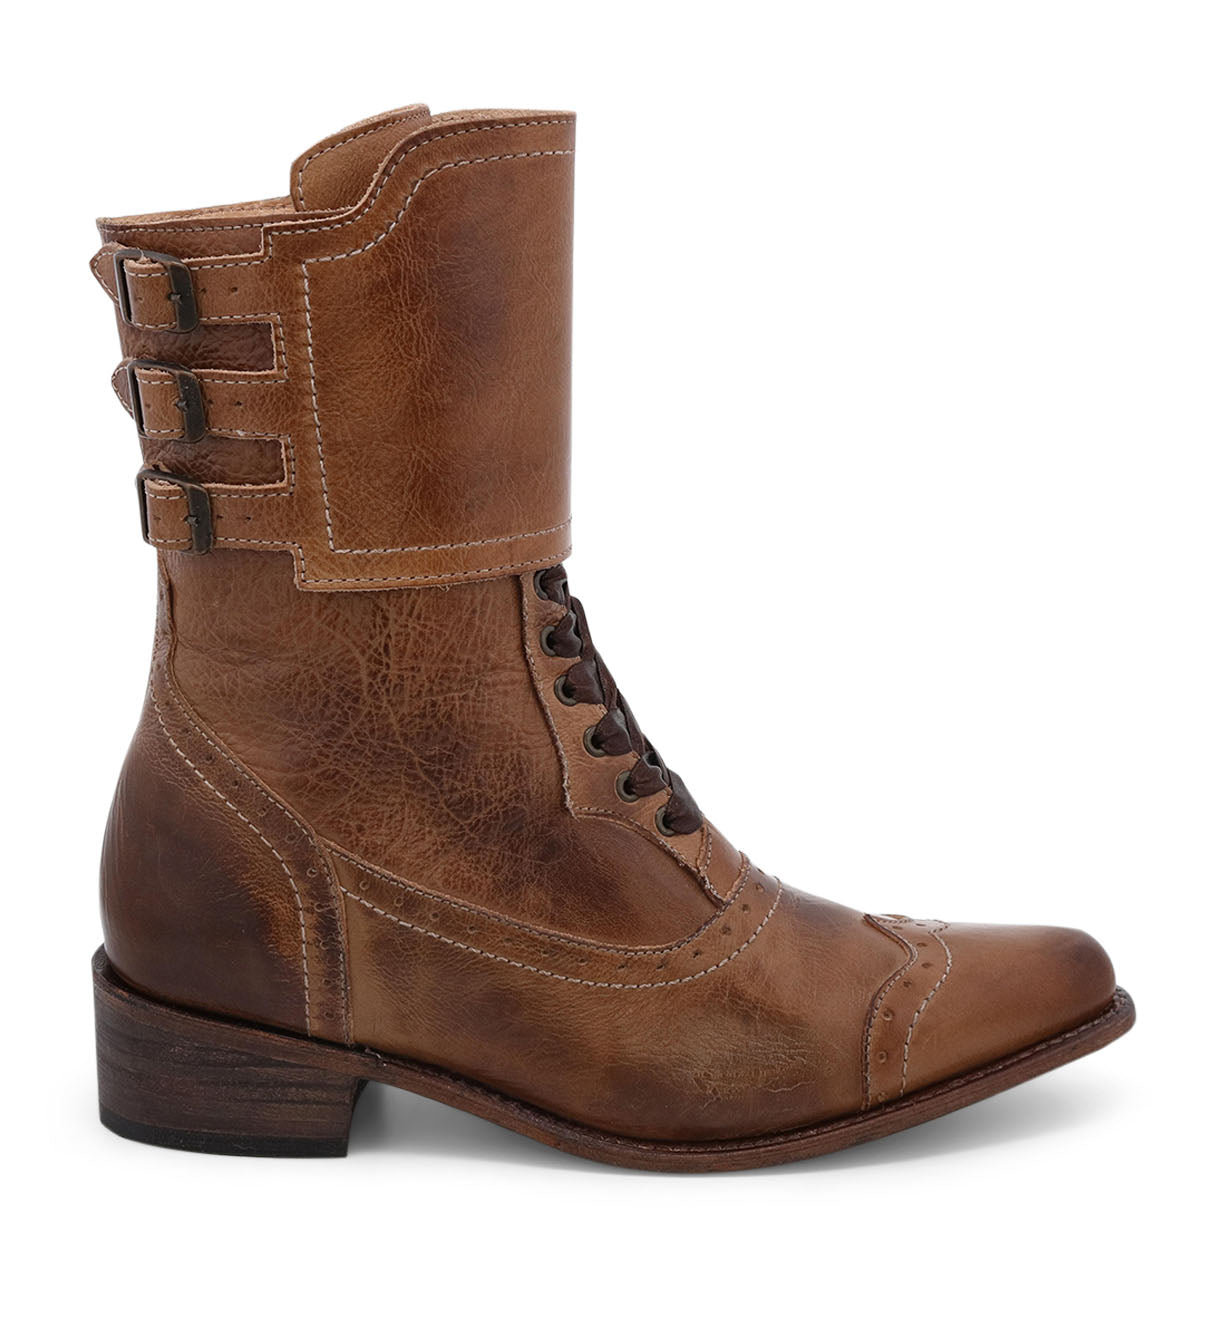 The Oak Tree Farms Faye riding boot is a handcrafted leather boot for women, featuring buckles and straps.